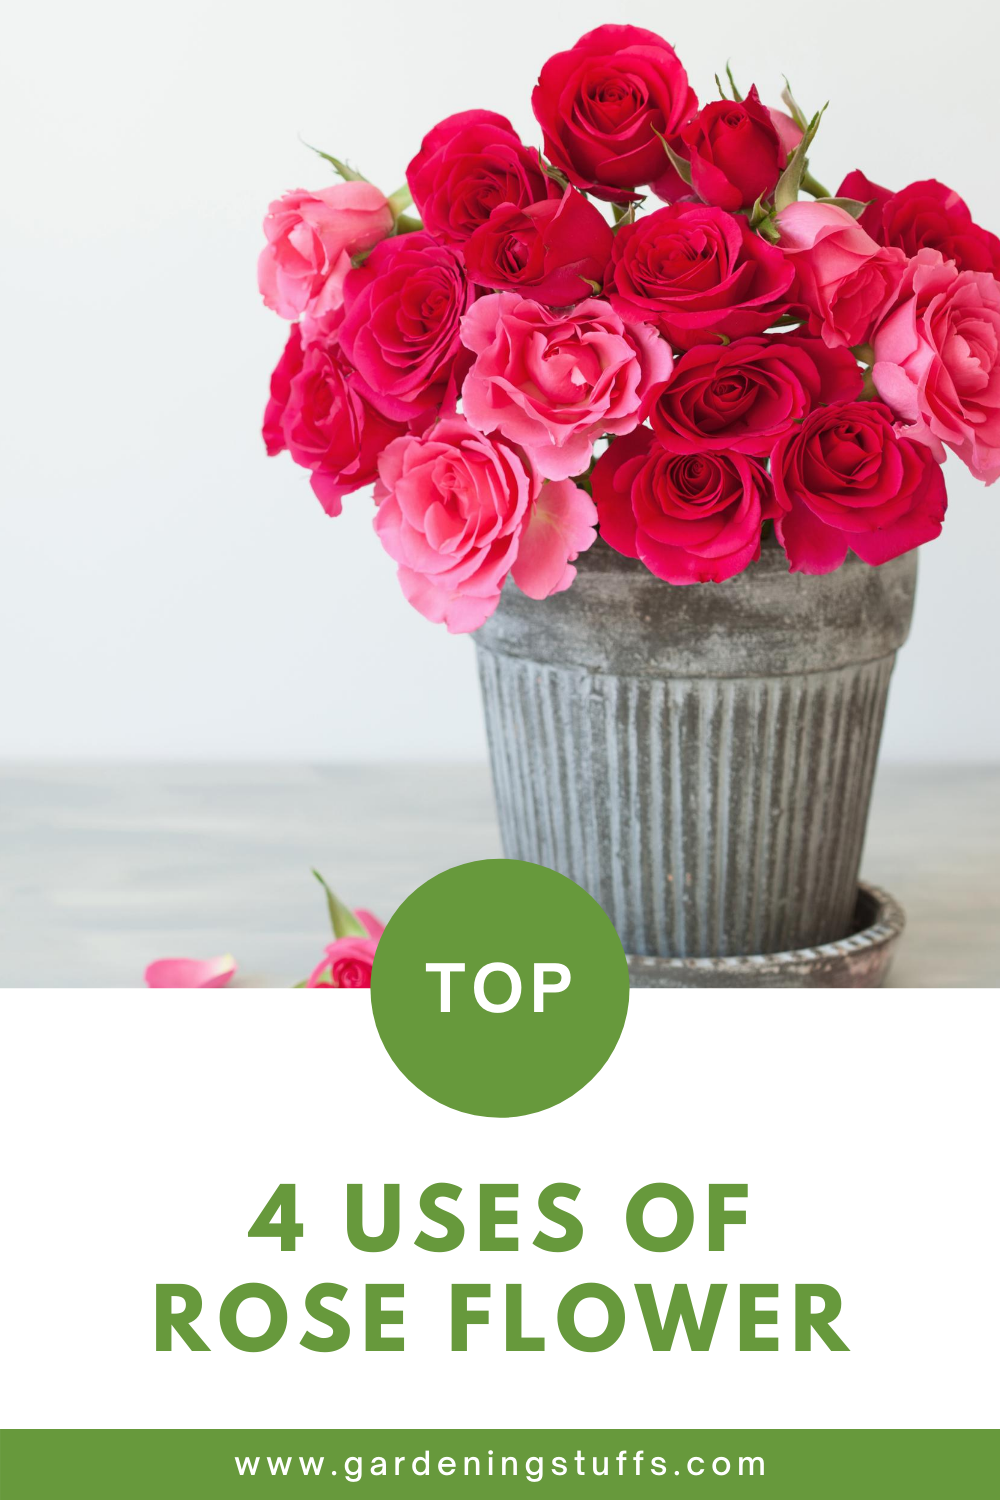 Roses are widely grown for their beauty and their pleasant smell. They can also be used to make essential oil perfumes for their sweet fragrance. Read on and discover what the uses of roses are.